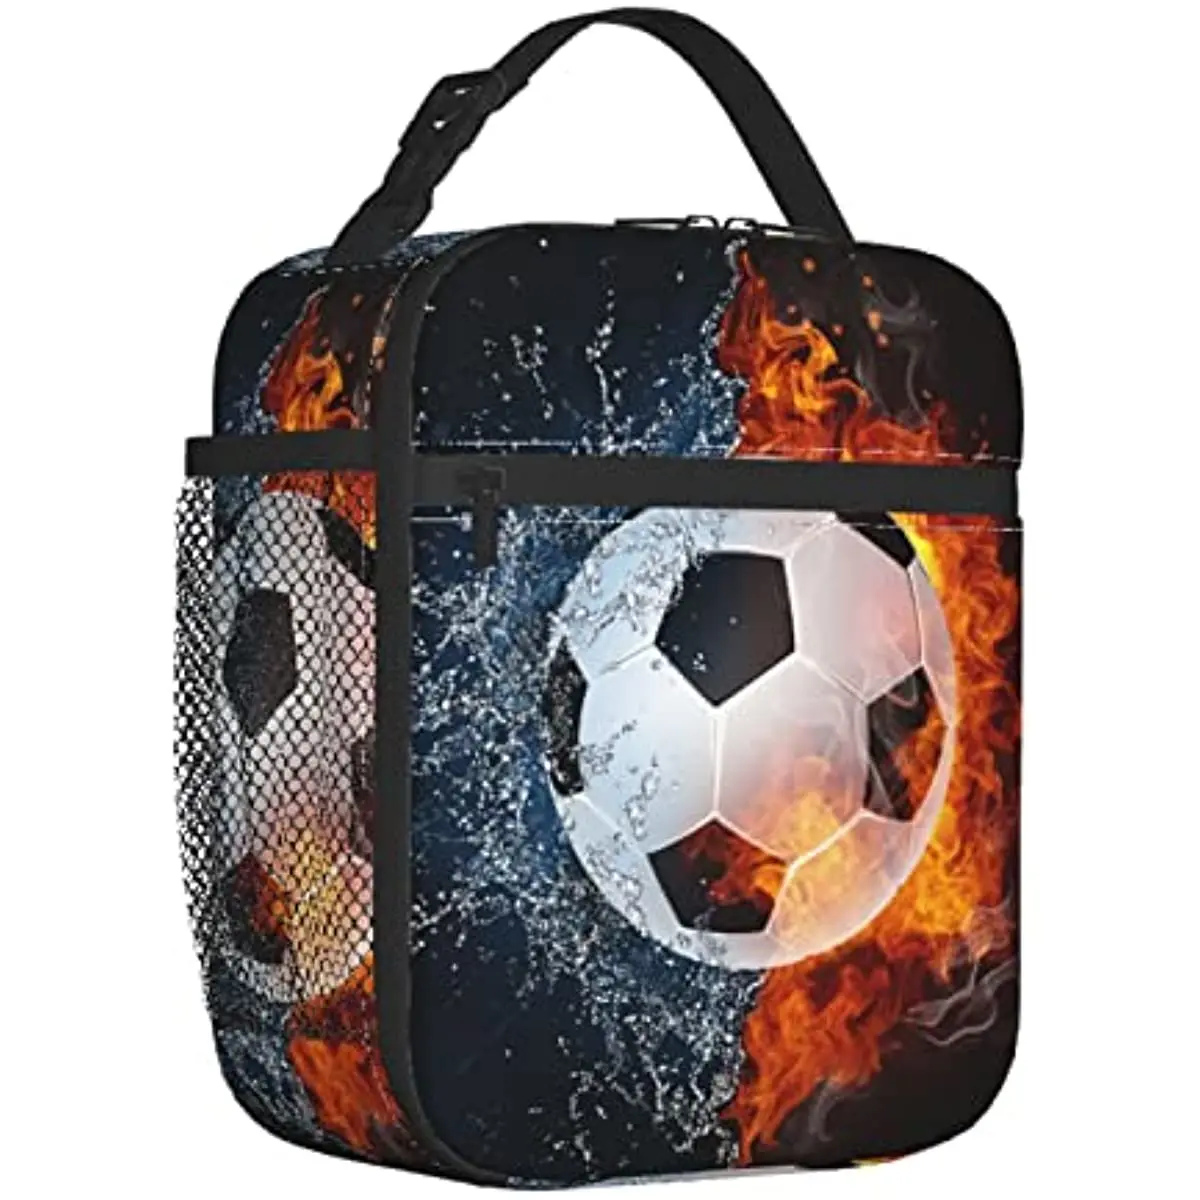 

Soccer Insulated Lunch Box Customized Lunch Bag for Boys Girls Women Men with Name Text Portable Meal Bag Work Shcool Picnic